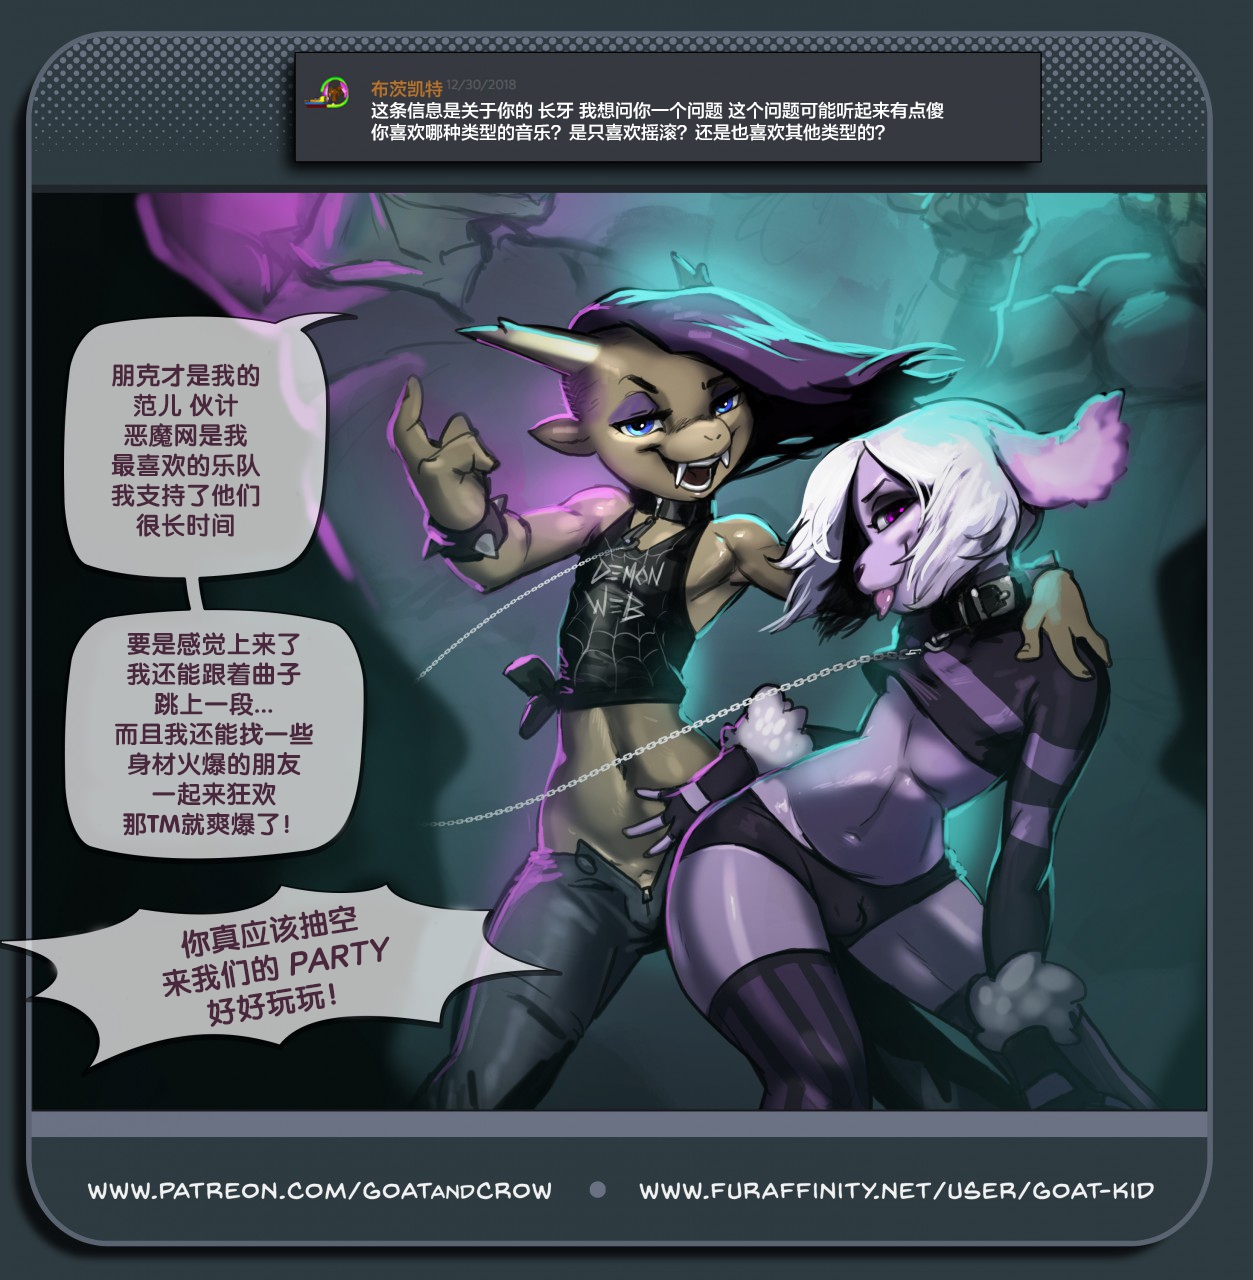 [goat-kid] Scattered issue 2 [Chinese] [逃亡者x新桥月白日语社汉化] 33